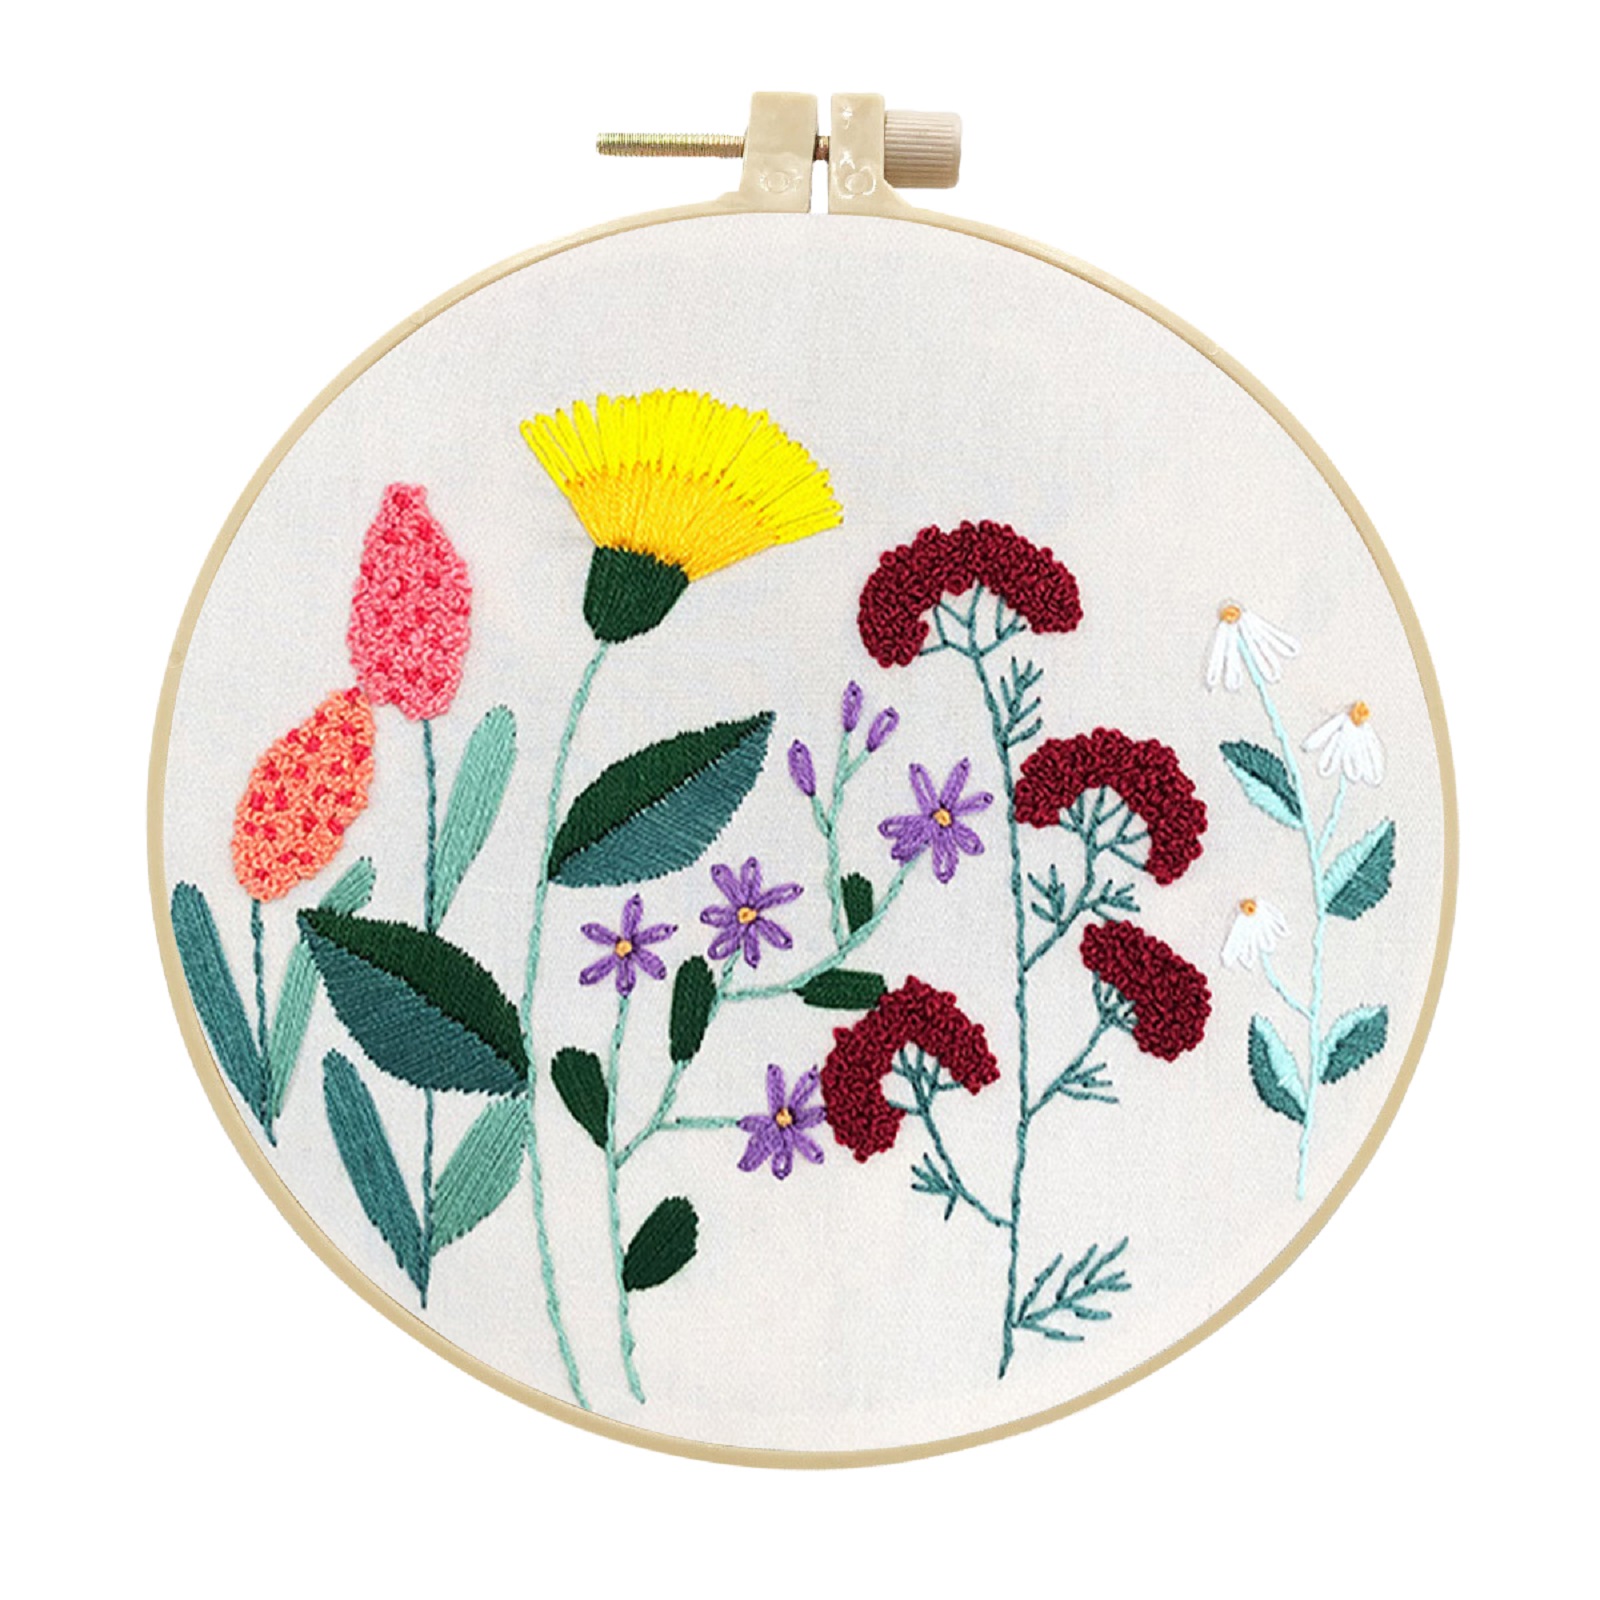 Embroidery Kits Cross stitch kits for Adult Beginner - Cute Wildflowers Pattern